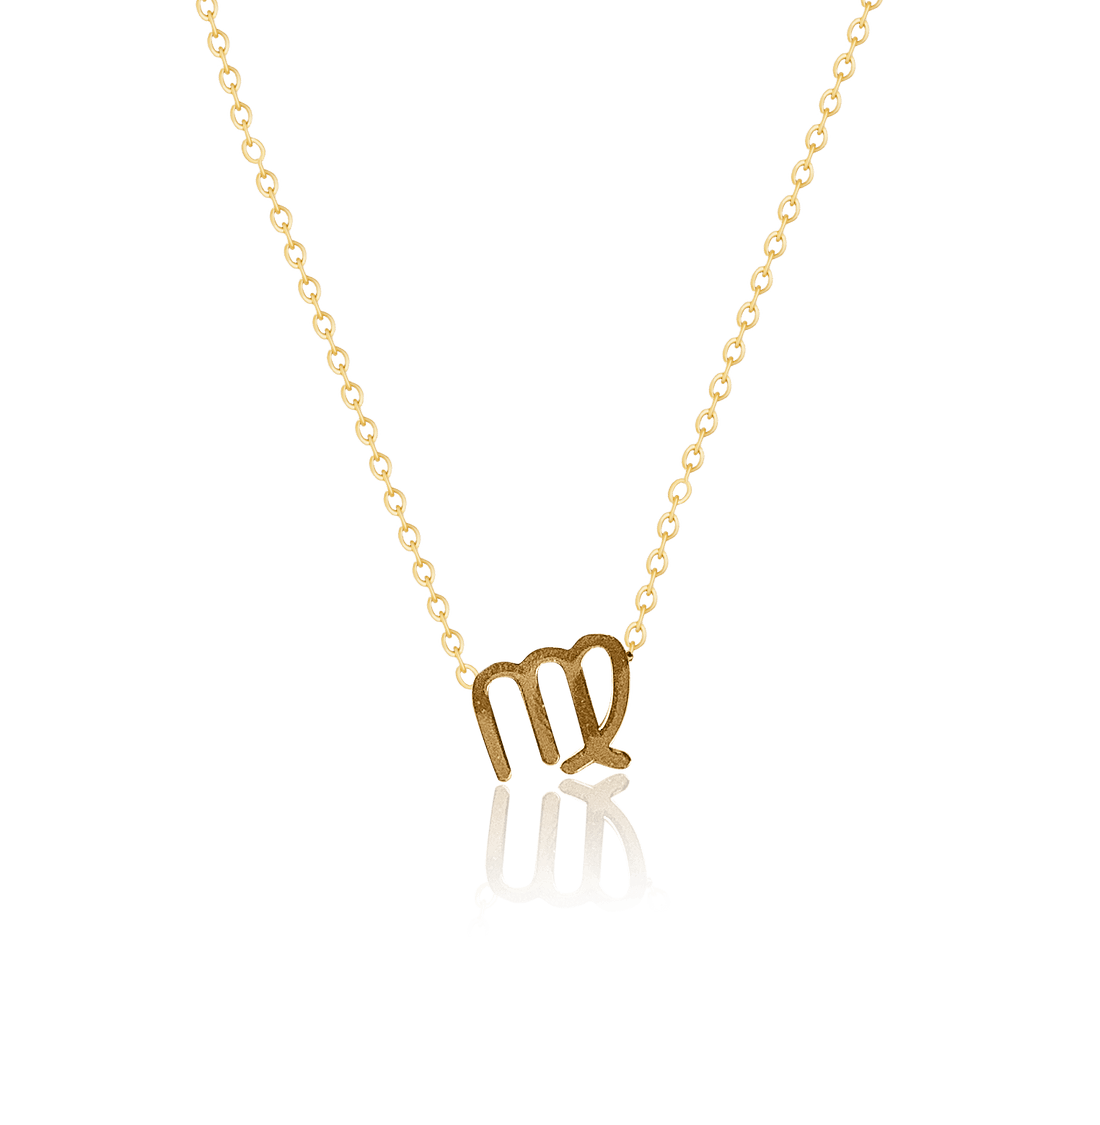 bianco rosso Necklaces Gold Virgo - Necklace cyprus greece jewelry gift free shipping europe worldwide